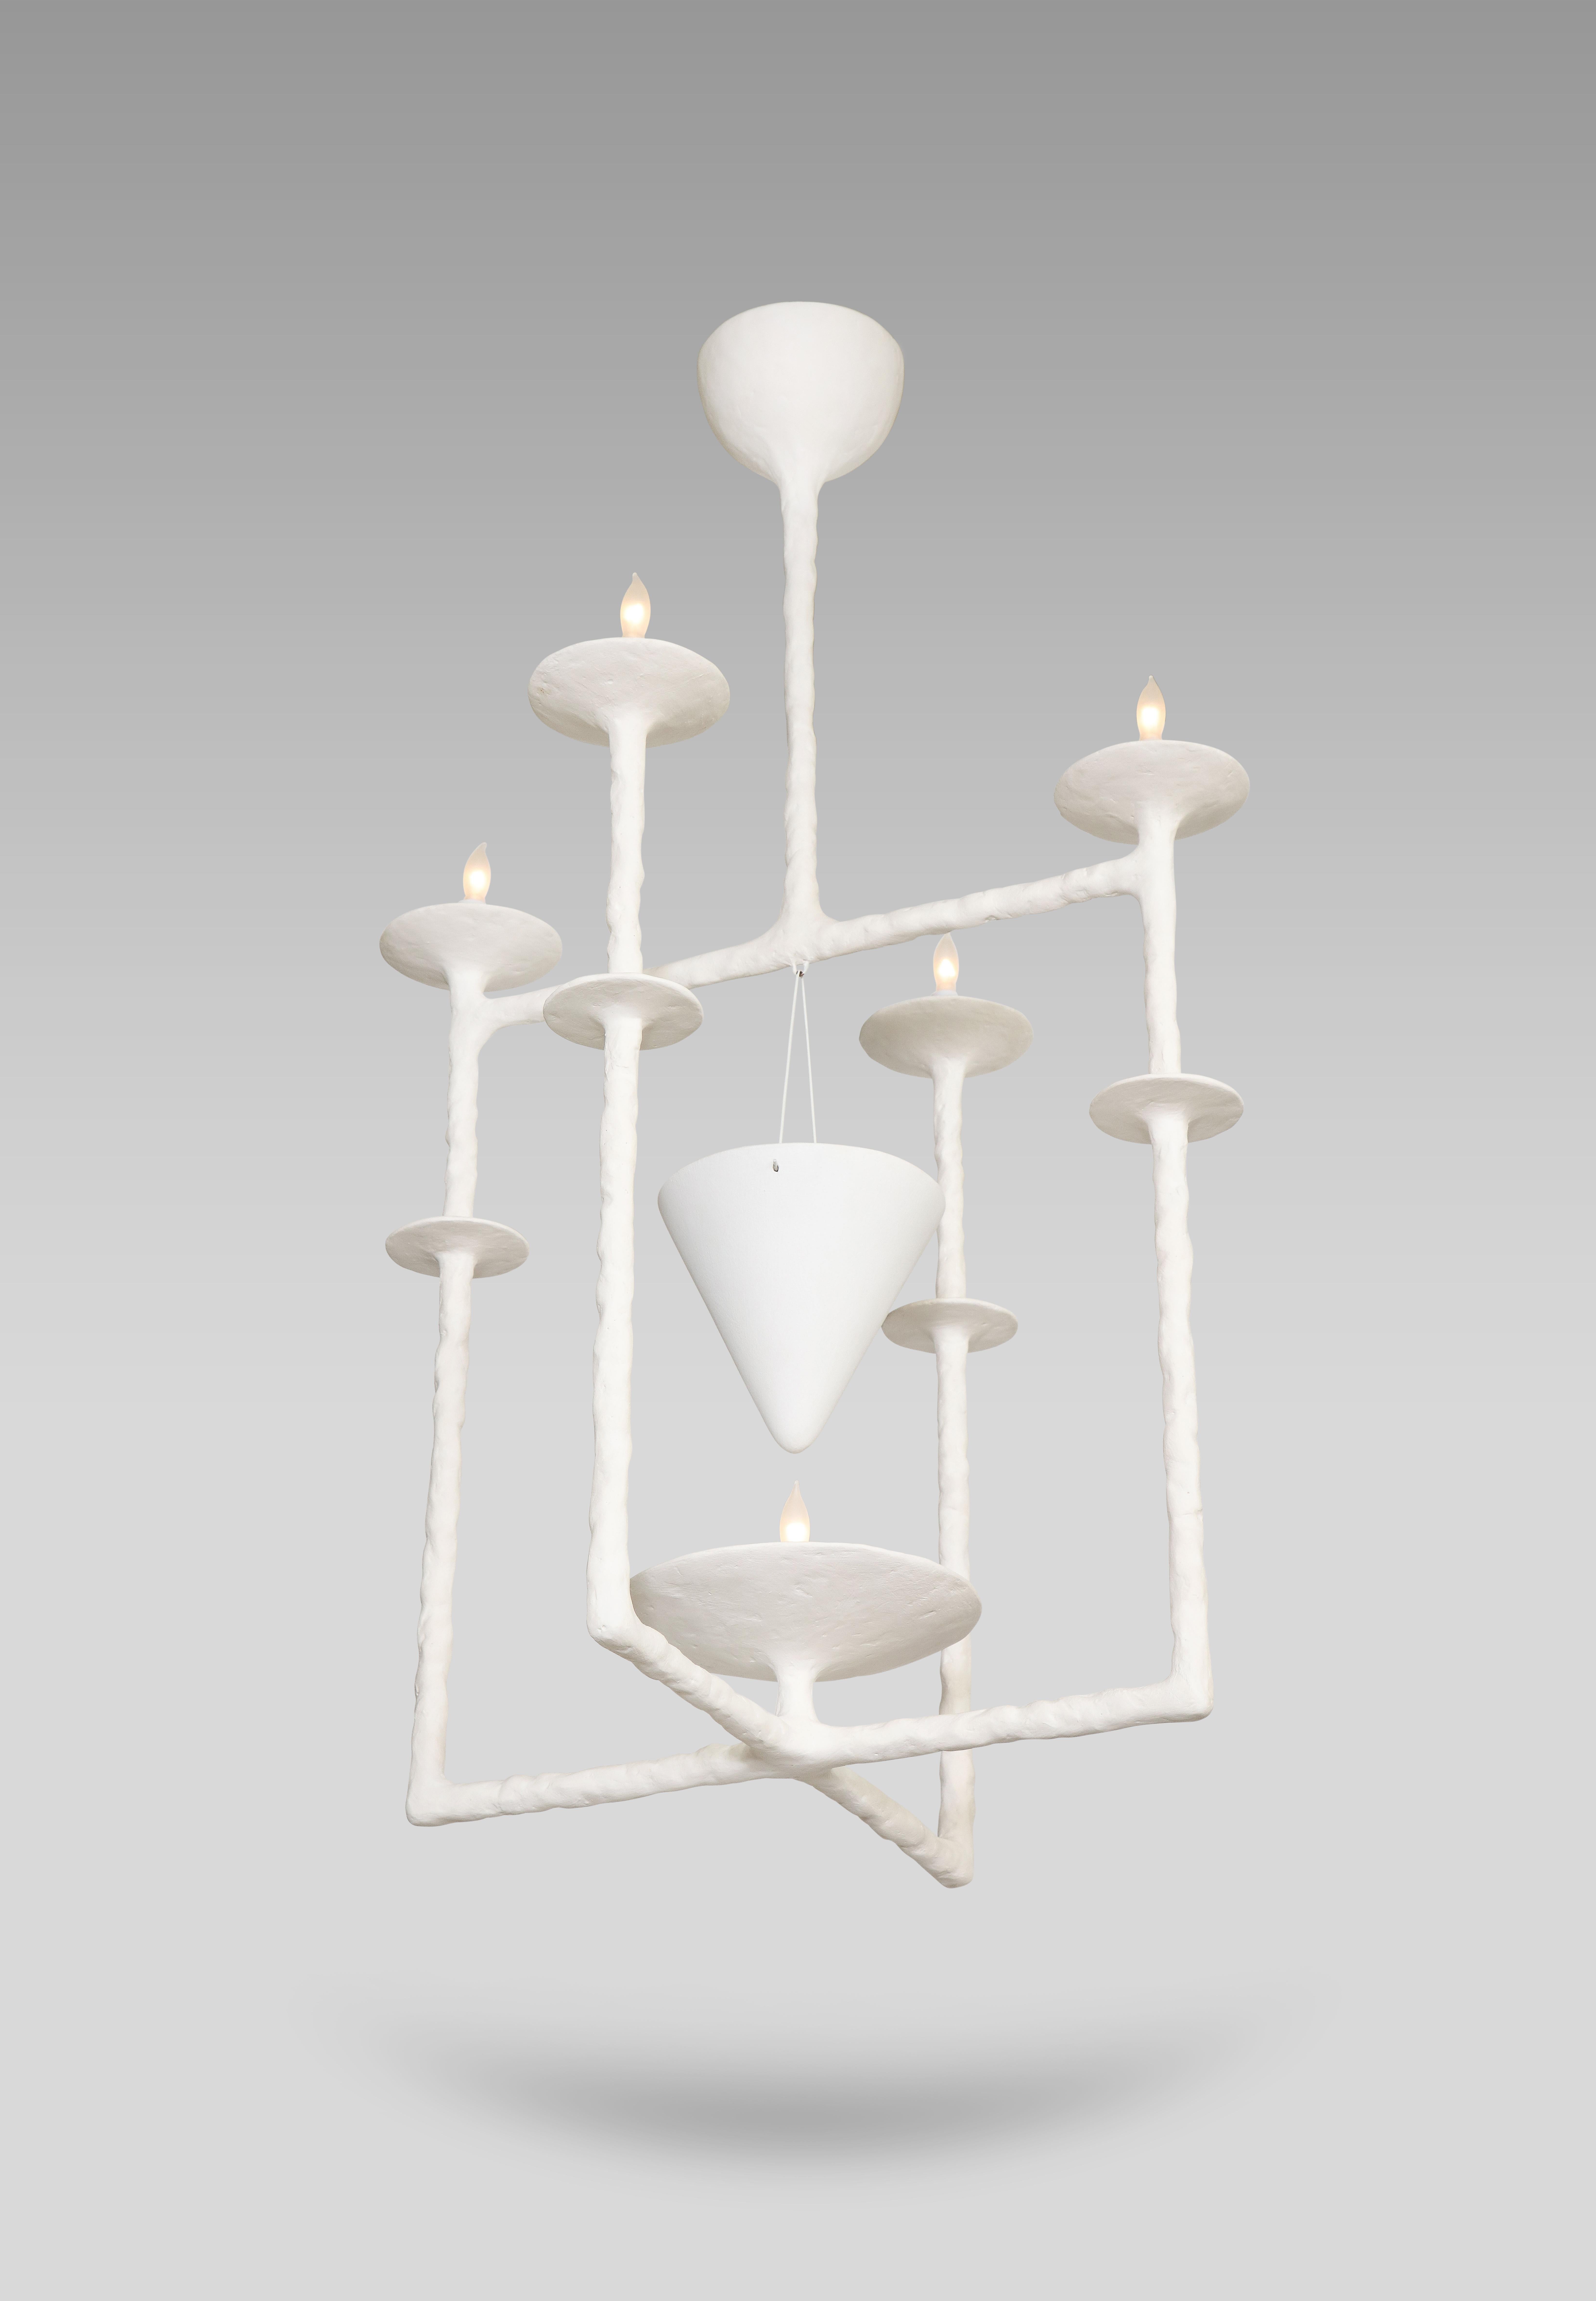 Delicate, handmade plaster form of intersecting square structures with four light sources, plus one bottom light source illuminating a suspended cone. A very unusual, sculptural design. *This fixture comes outfitted with either 2-pin G4 or G9